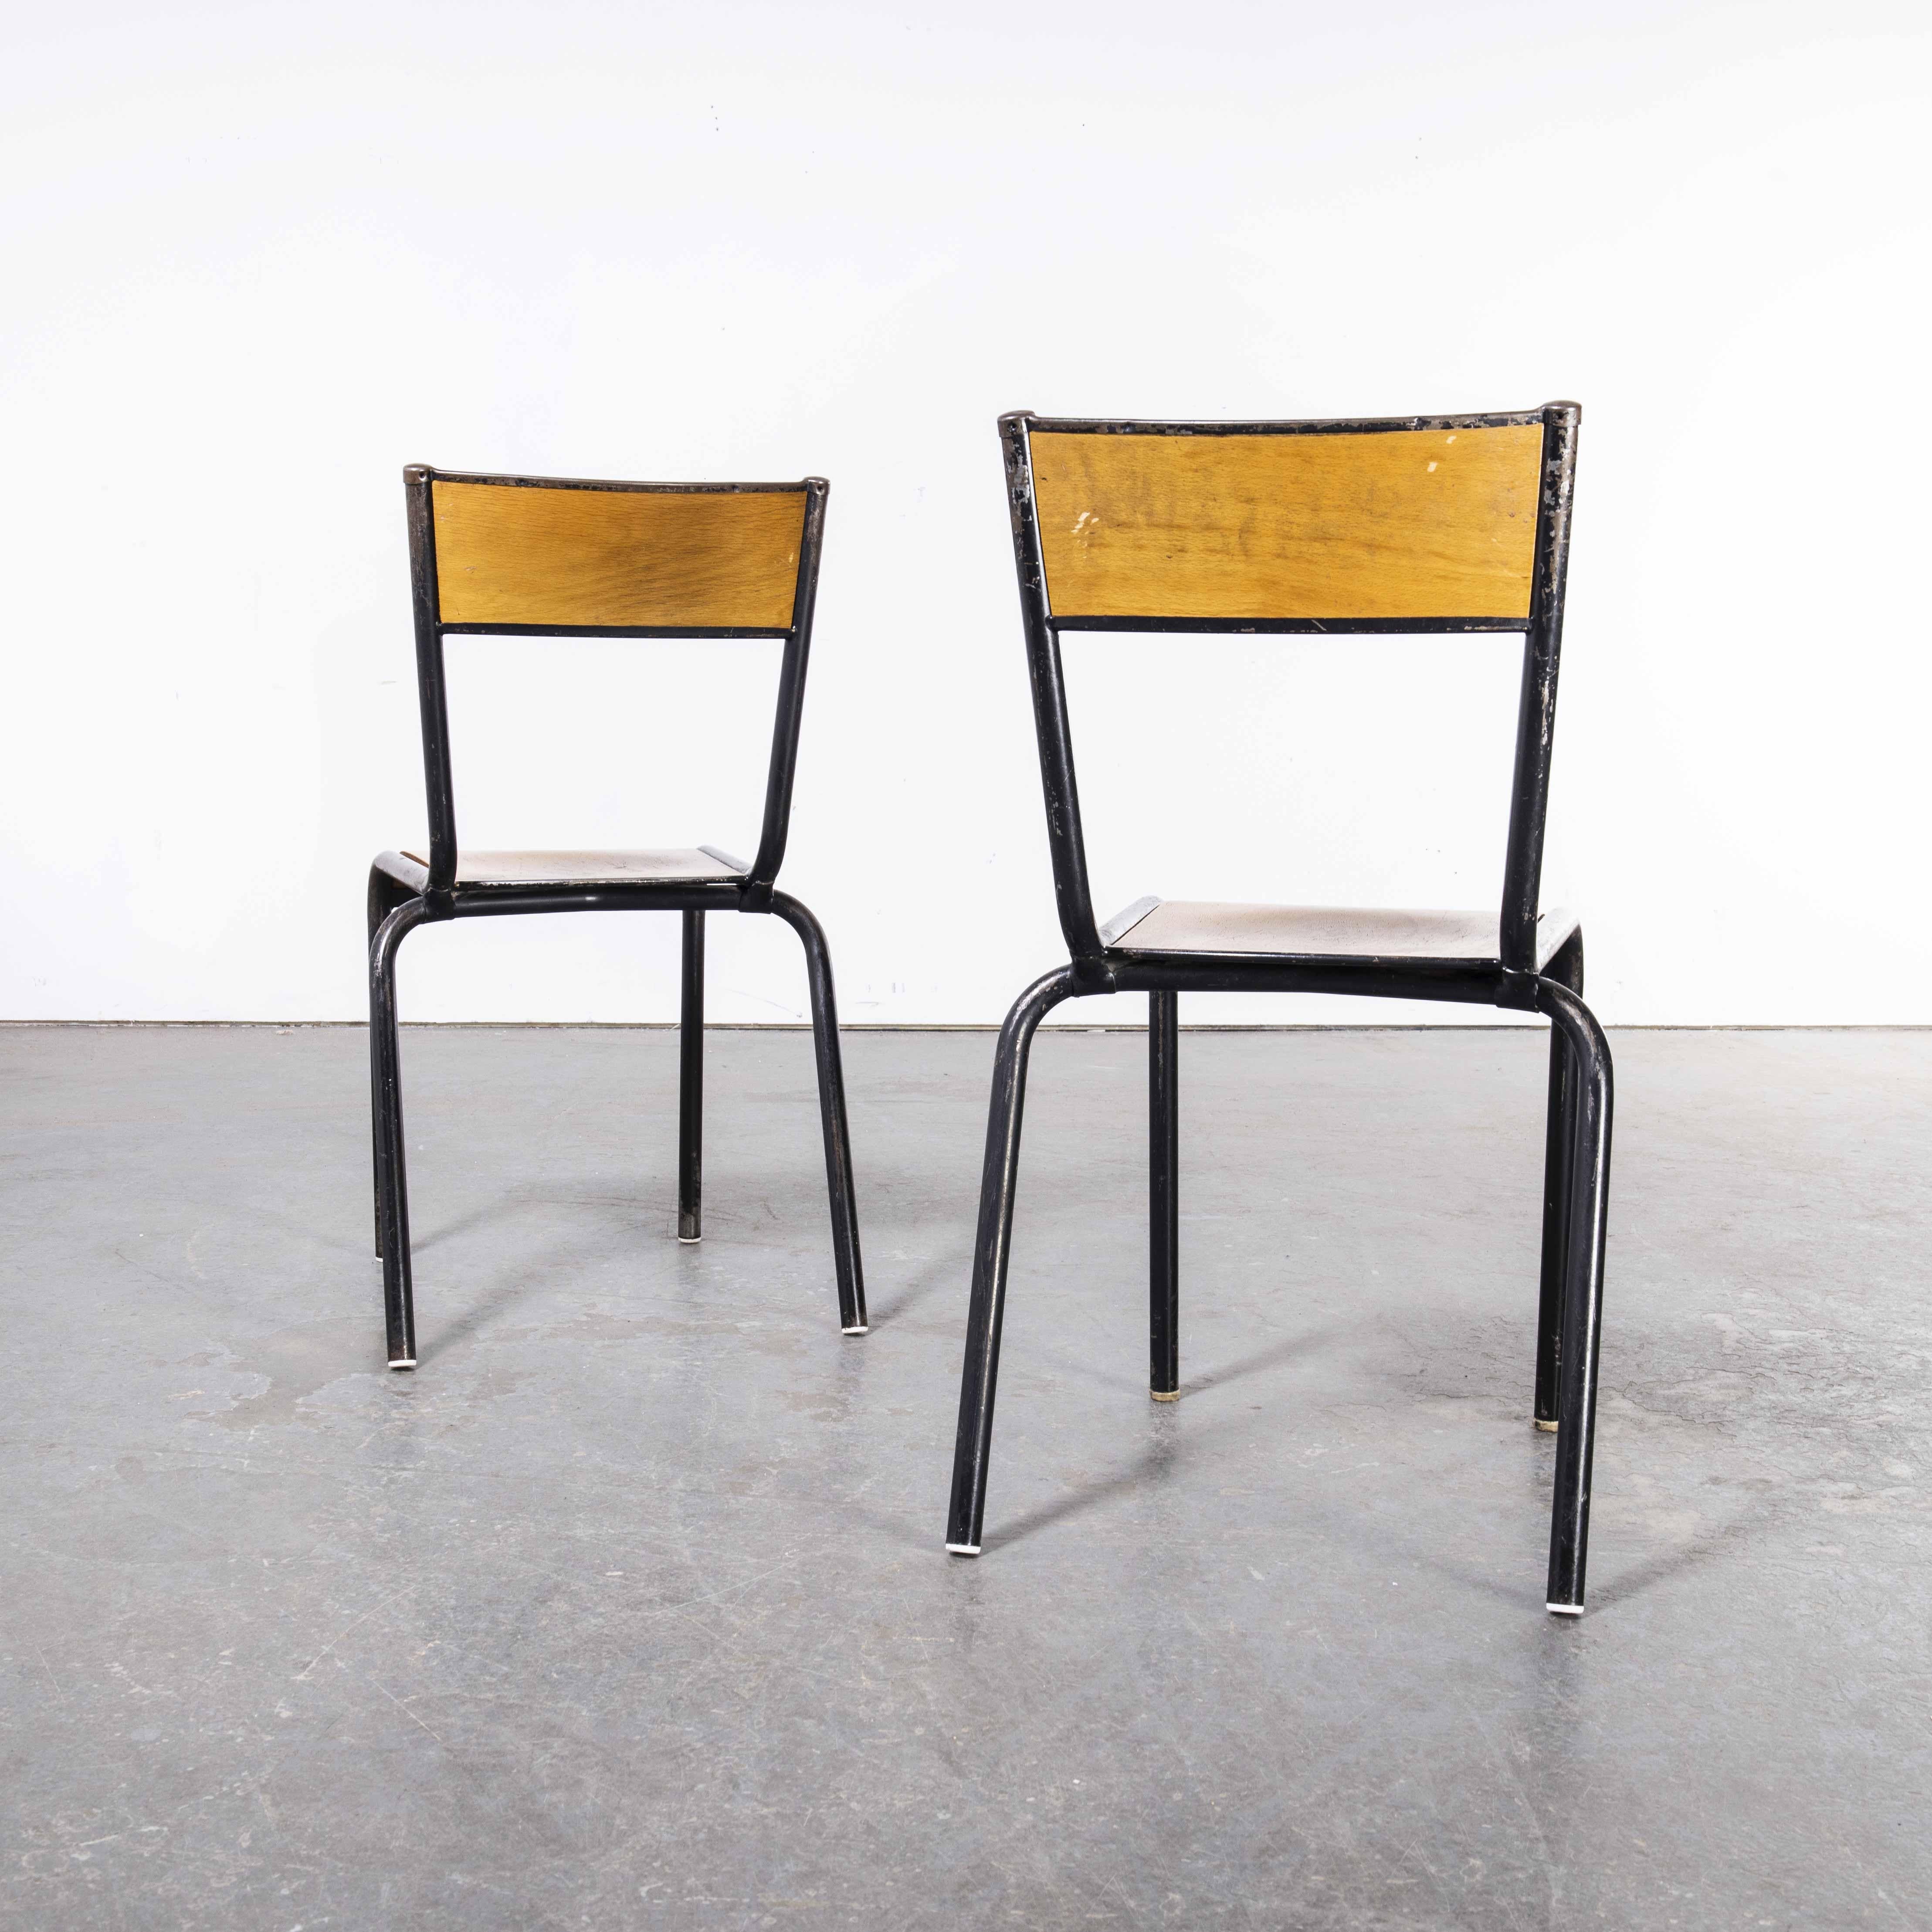 Mid-20th Century 1960's, French Mullca Stacking Chair, Black Frame, Pair For Sale